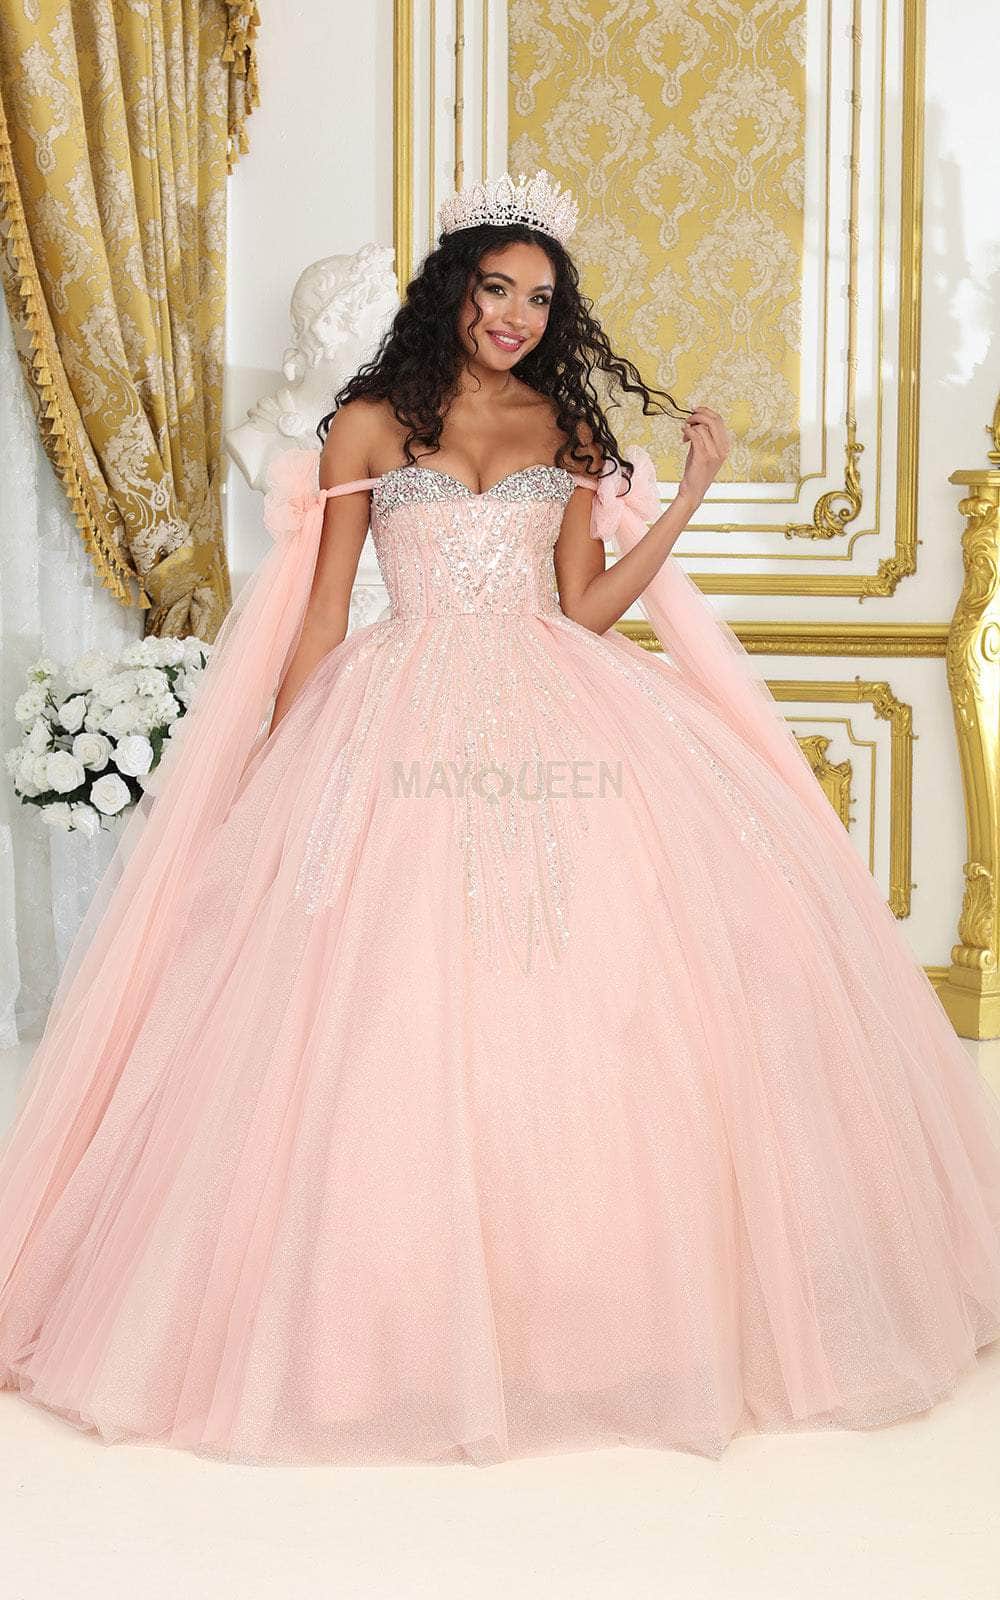 May Queen LK238 - Bow Accent Corset Ballgown Special Occasion Dresses